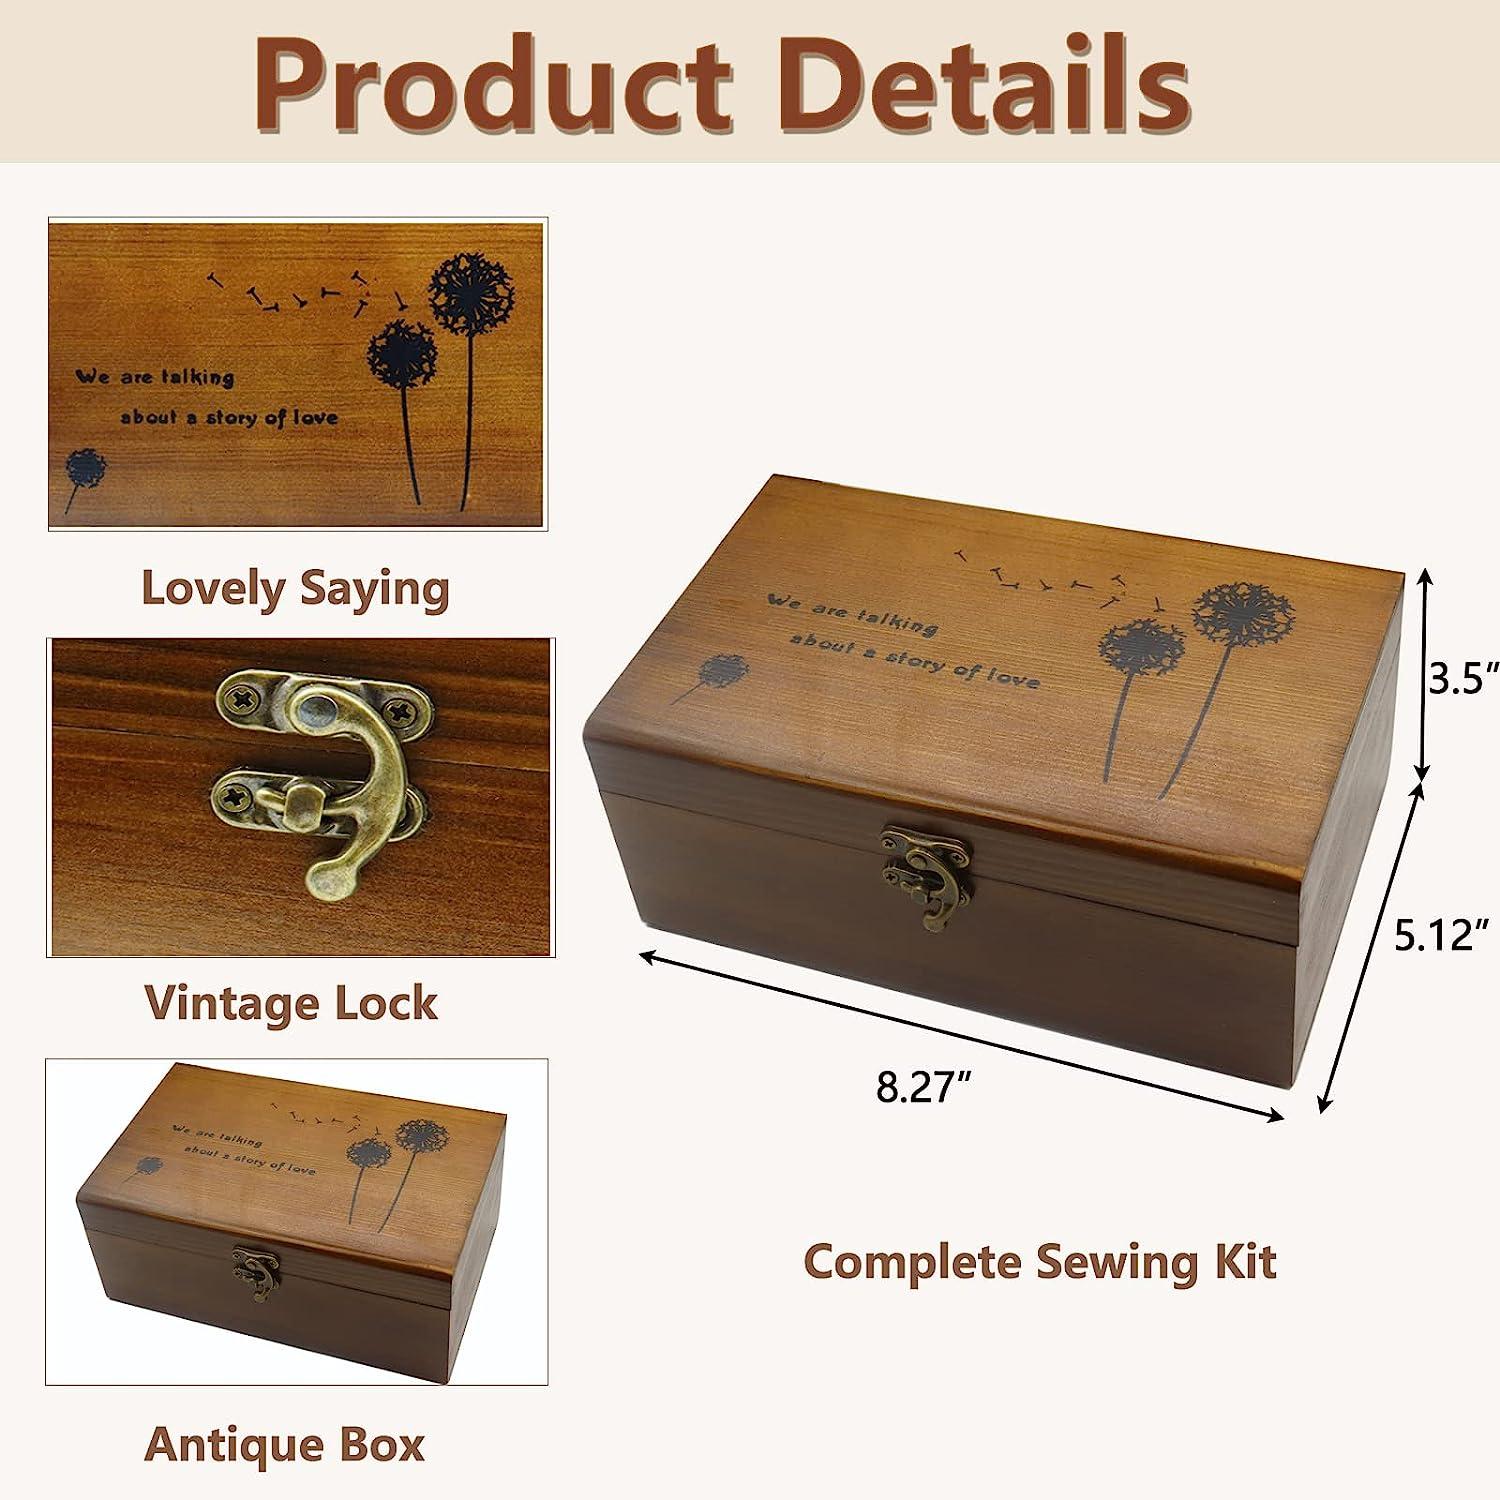 Wooden Sewing Box with Sewing Kit Accessories - Love to Stitch and Sew